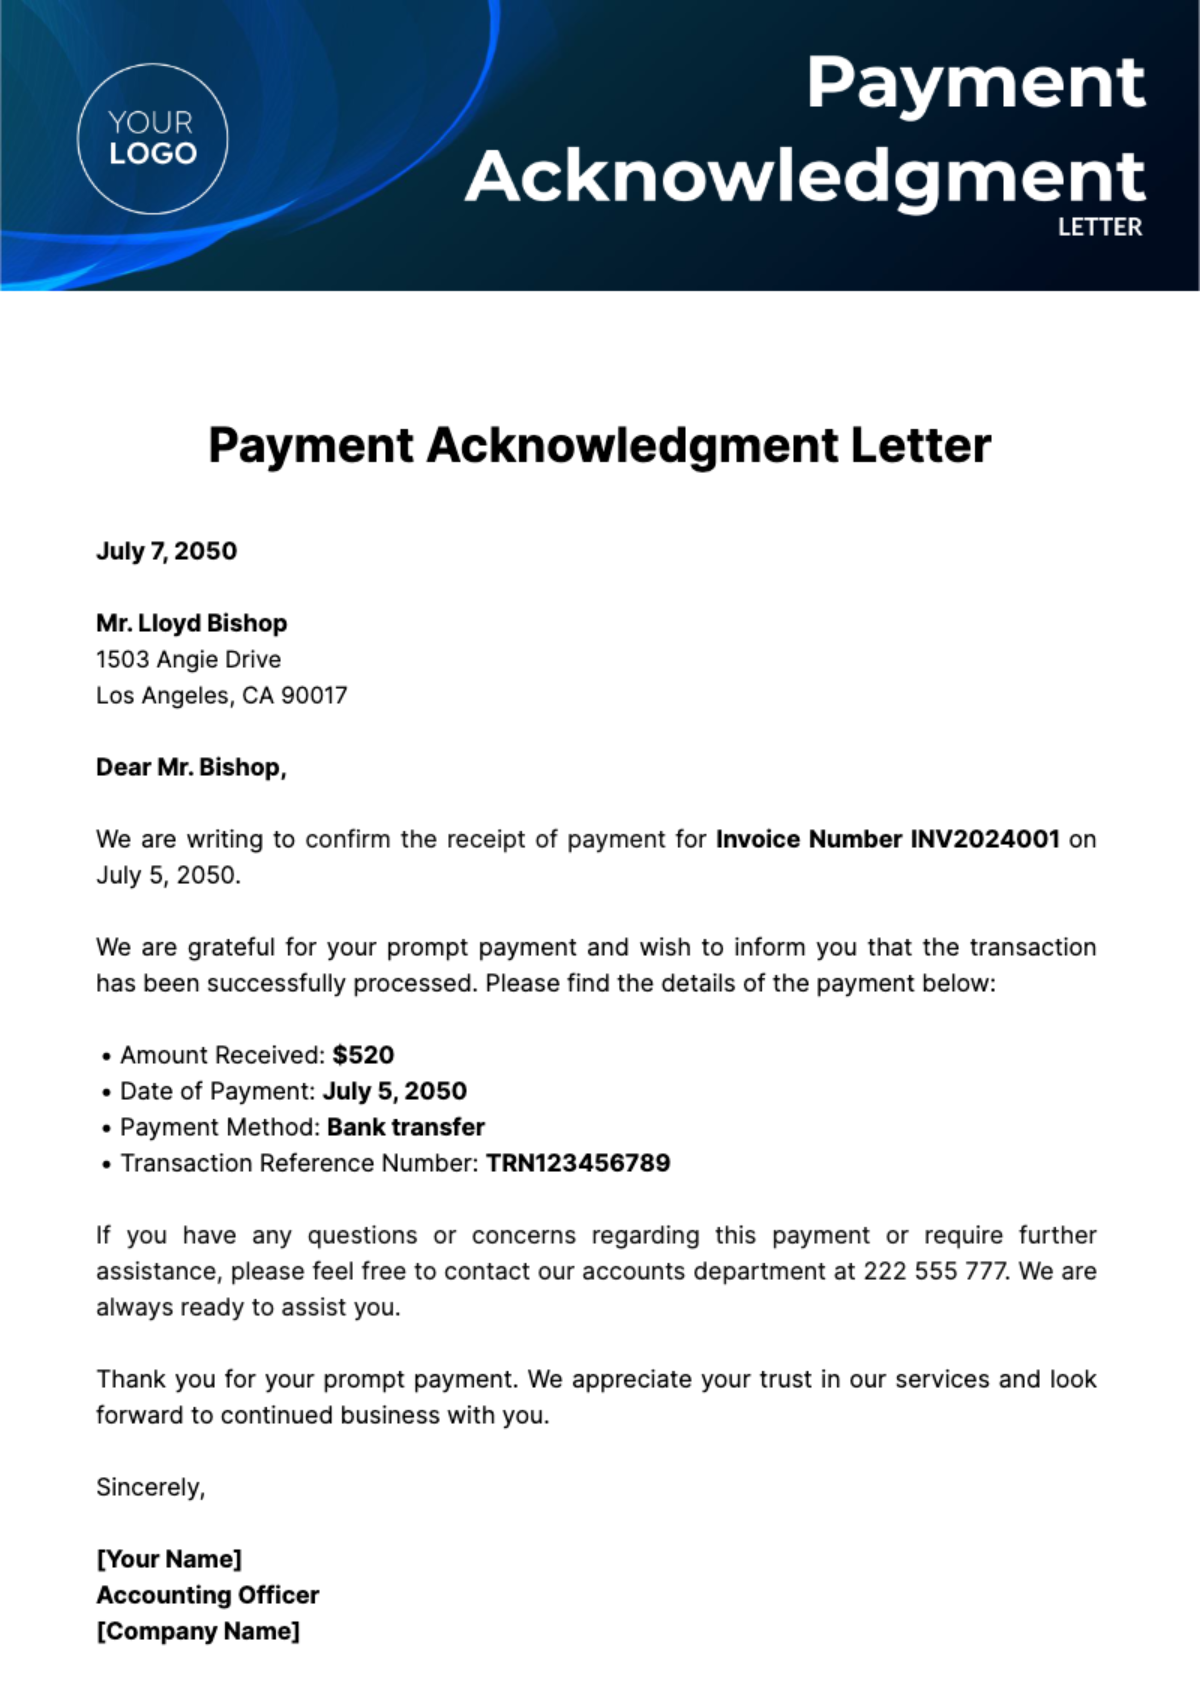 Payment Acknowledgment Letter Template